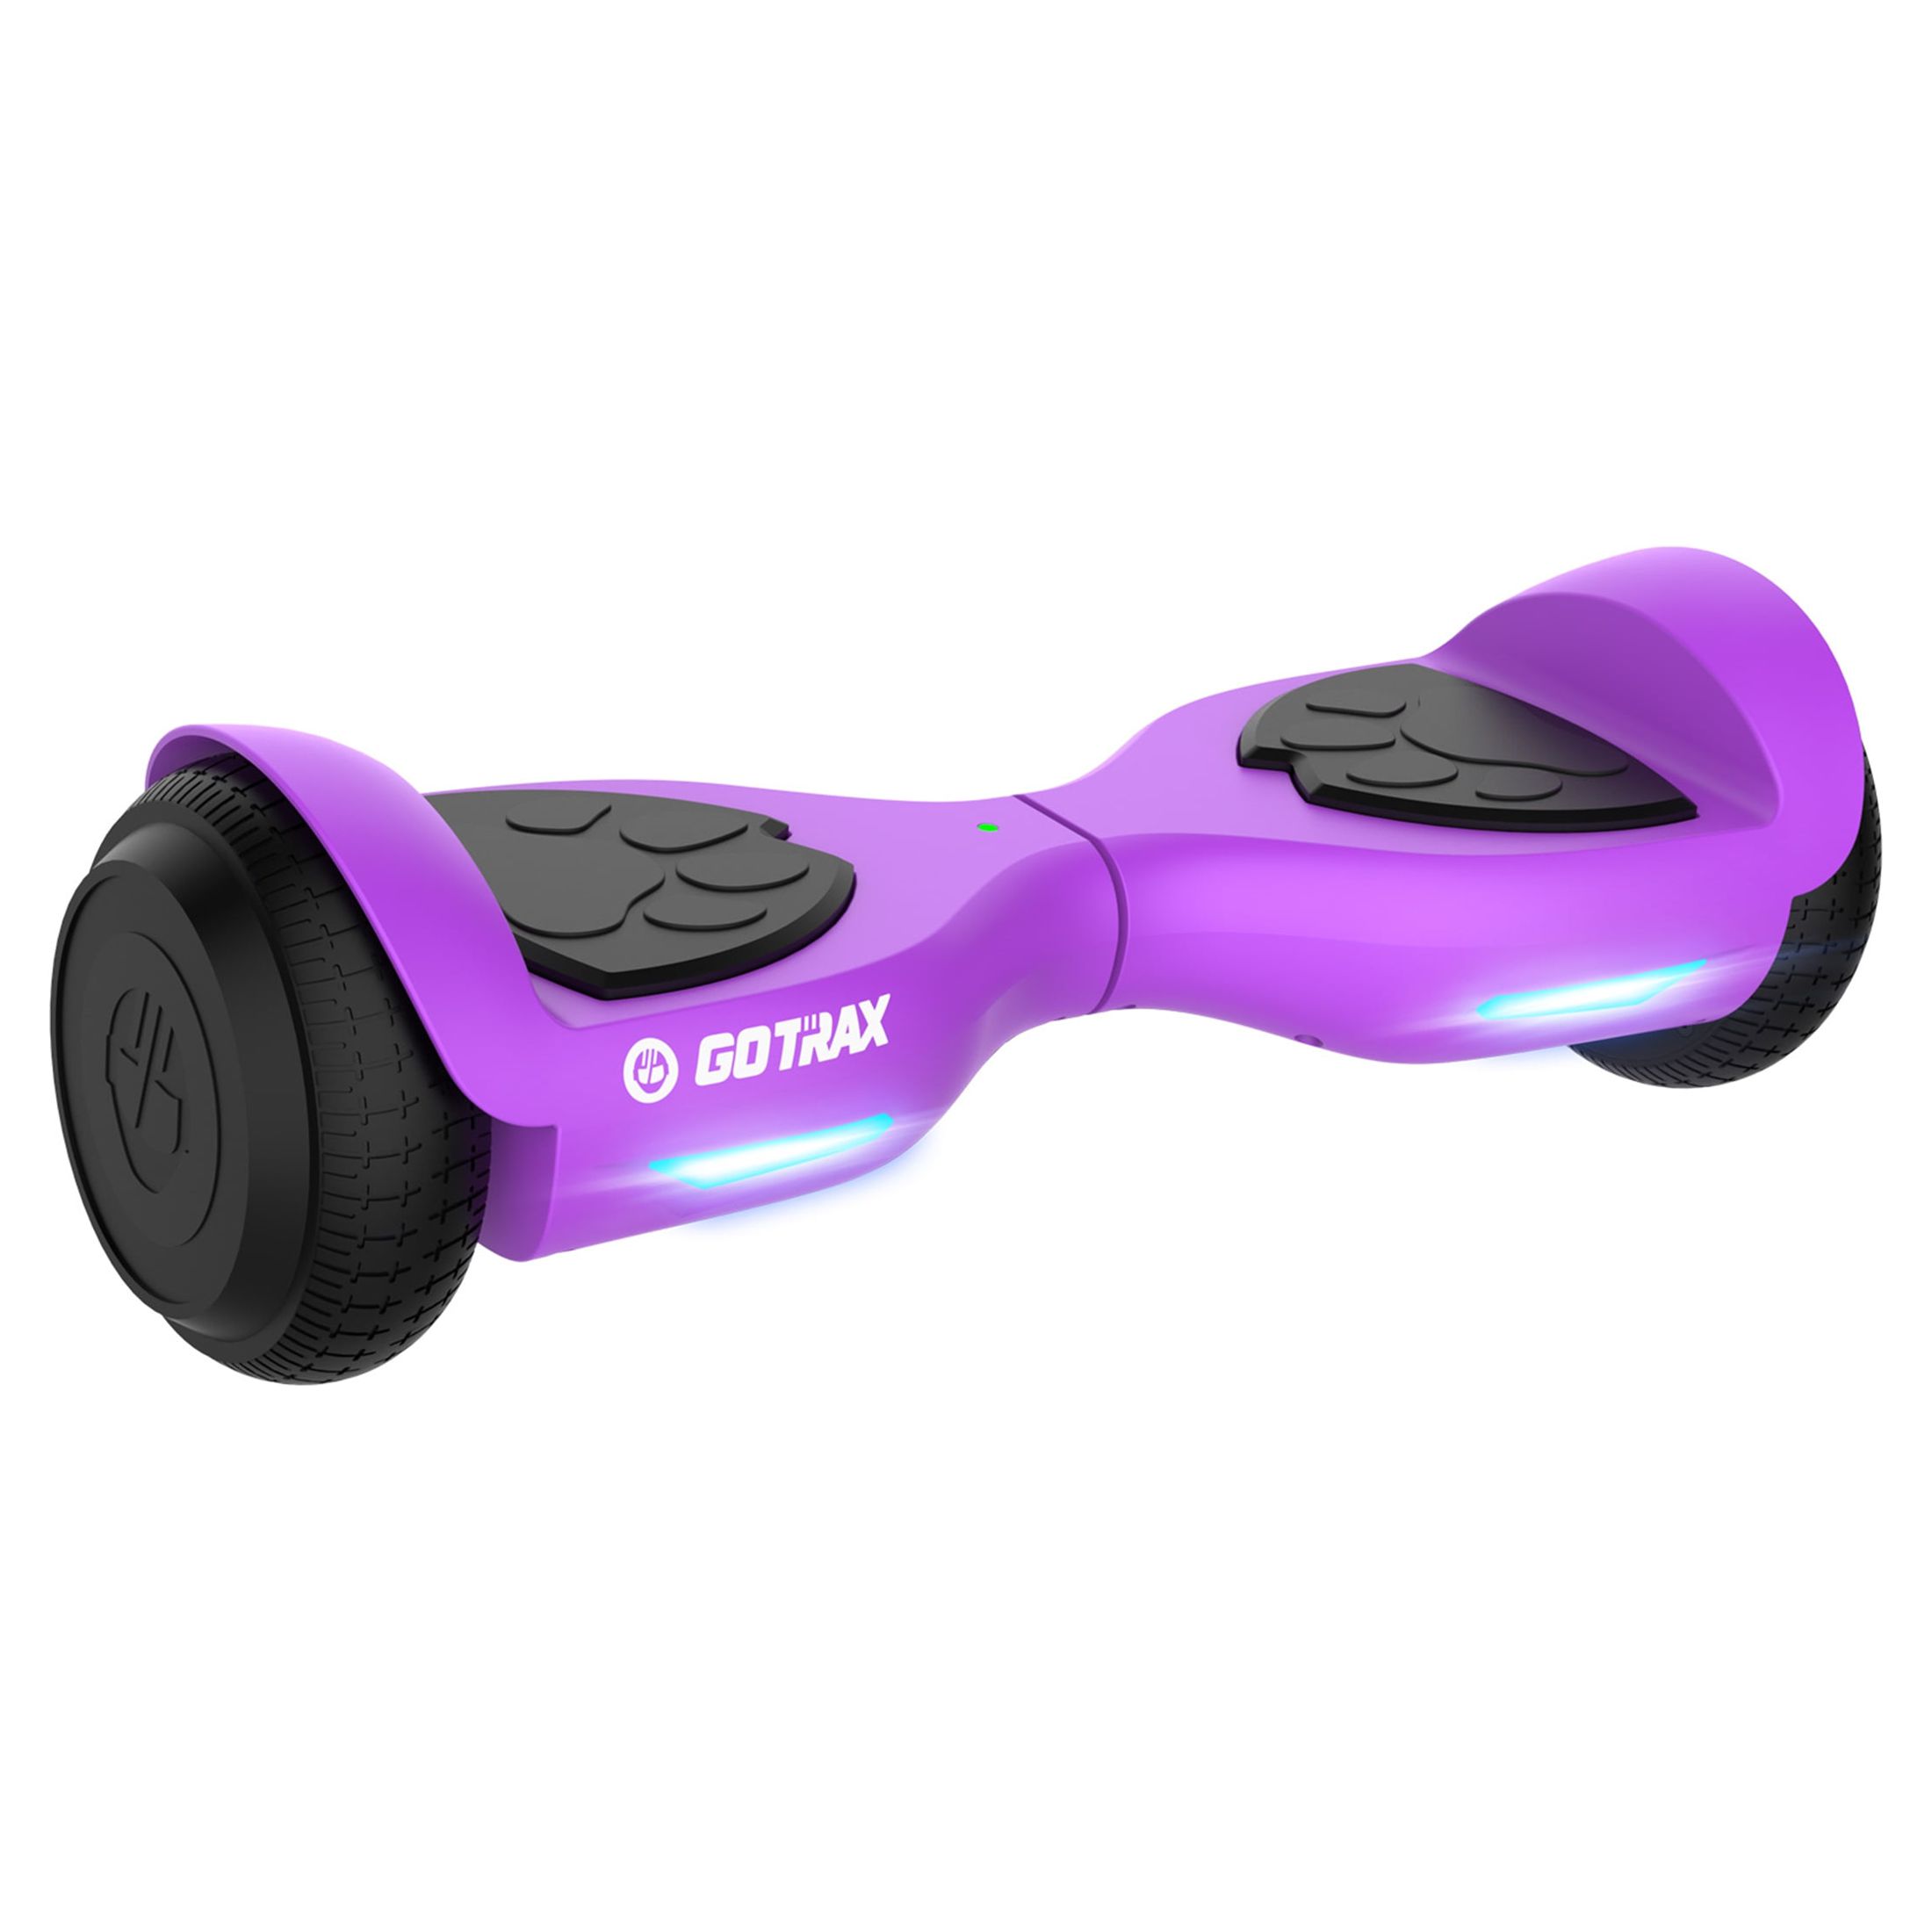 GOTRAX Lil Cub Hoverboard 6.5" Wheels, Max 2.5 Miles, 6.2mph Self Balance for 44-88lbs Kids, Purple - image 1 of 11